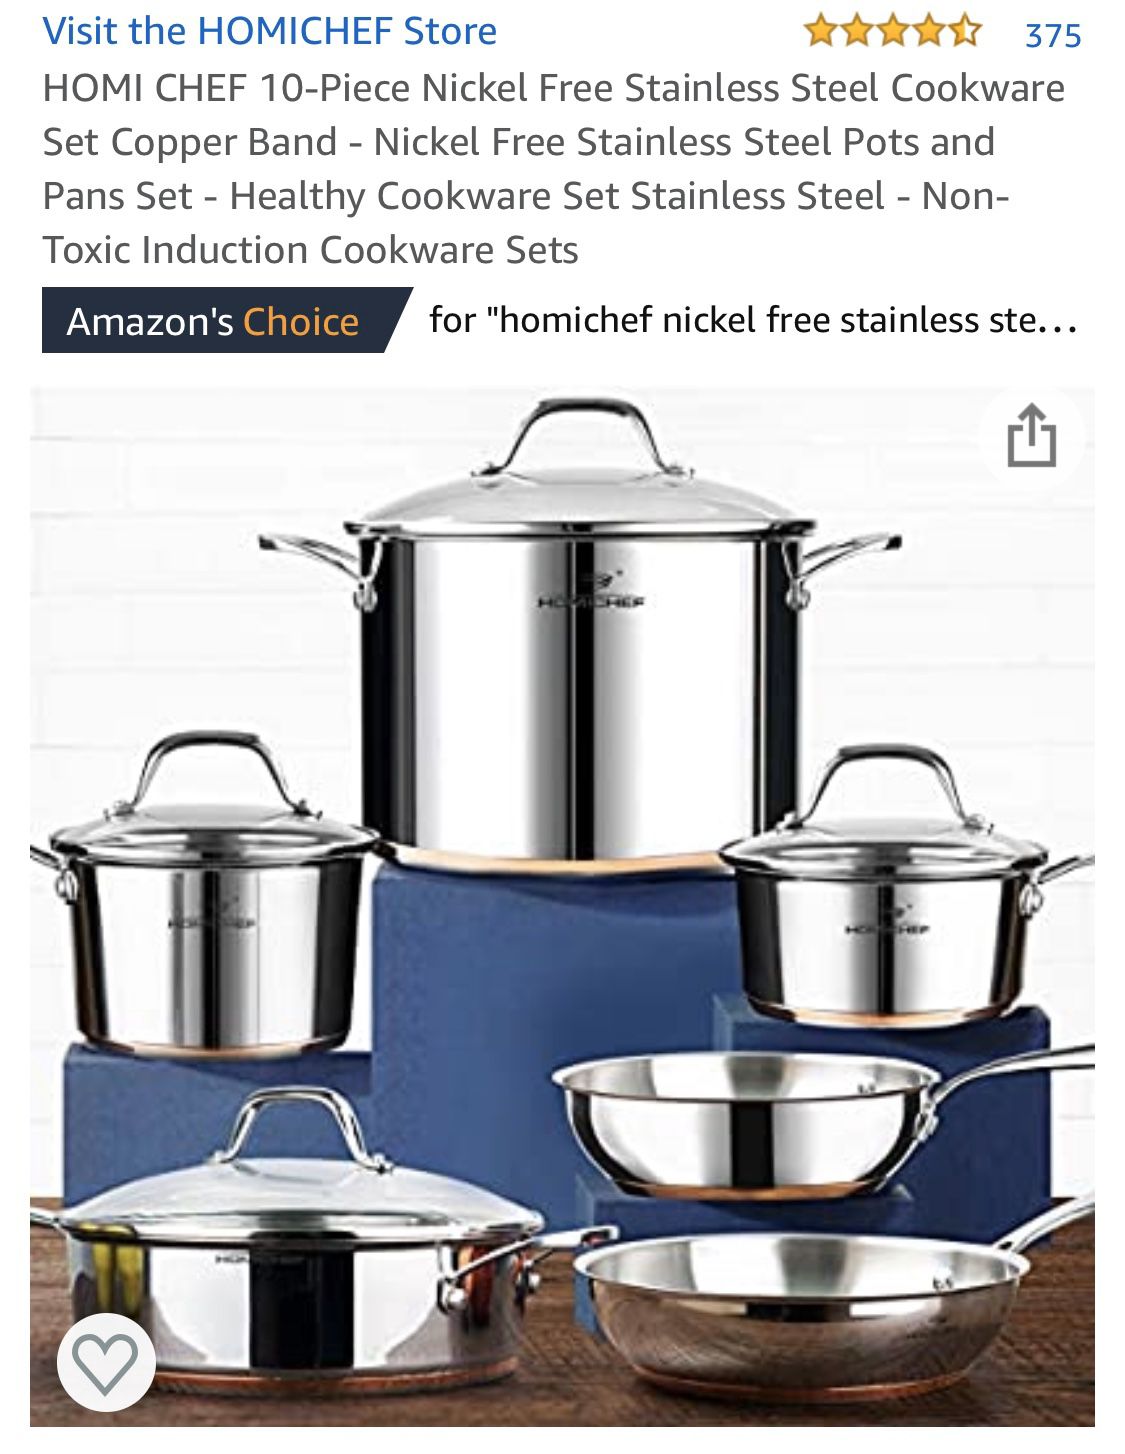 10 piece Stainless Steel Copper Band Cookware Set